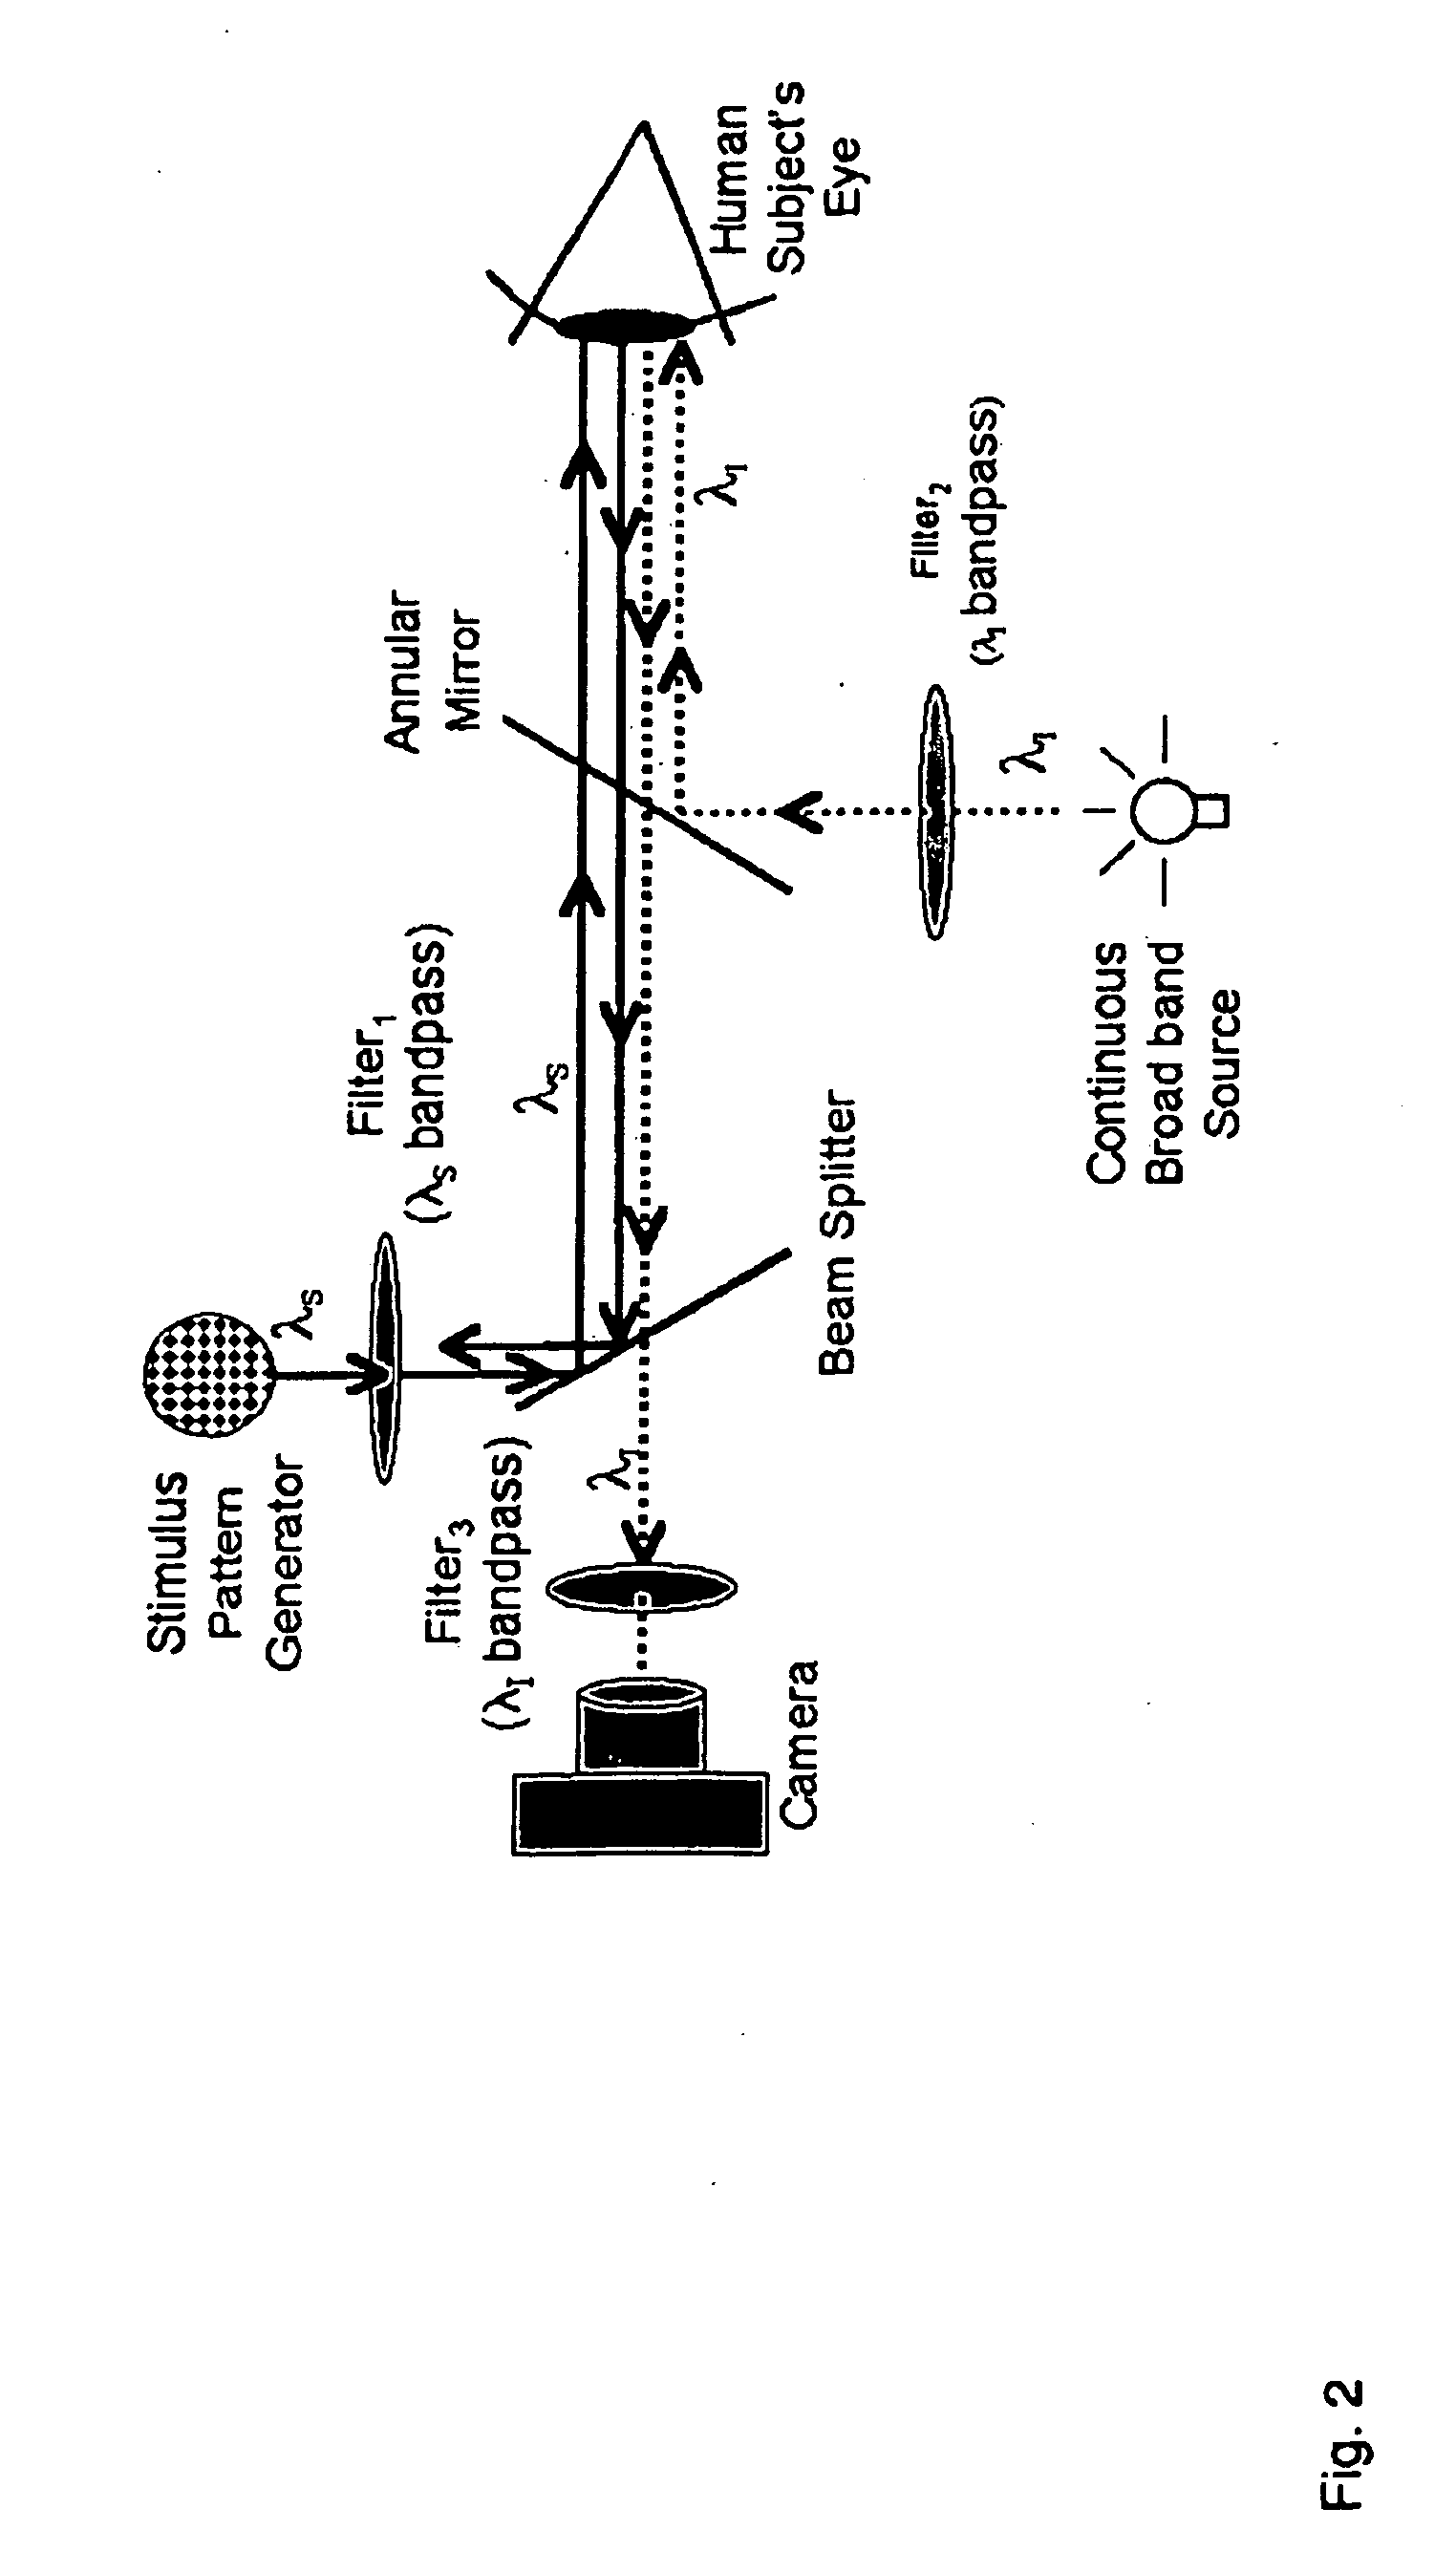 System and method for optical imaging of human retinal function